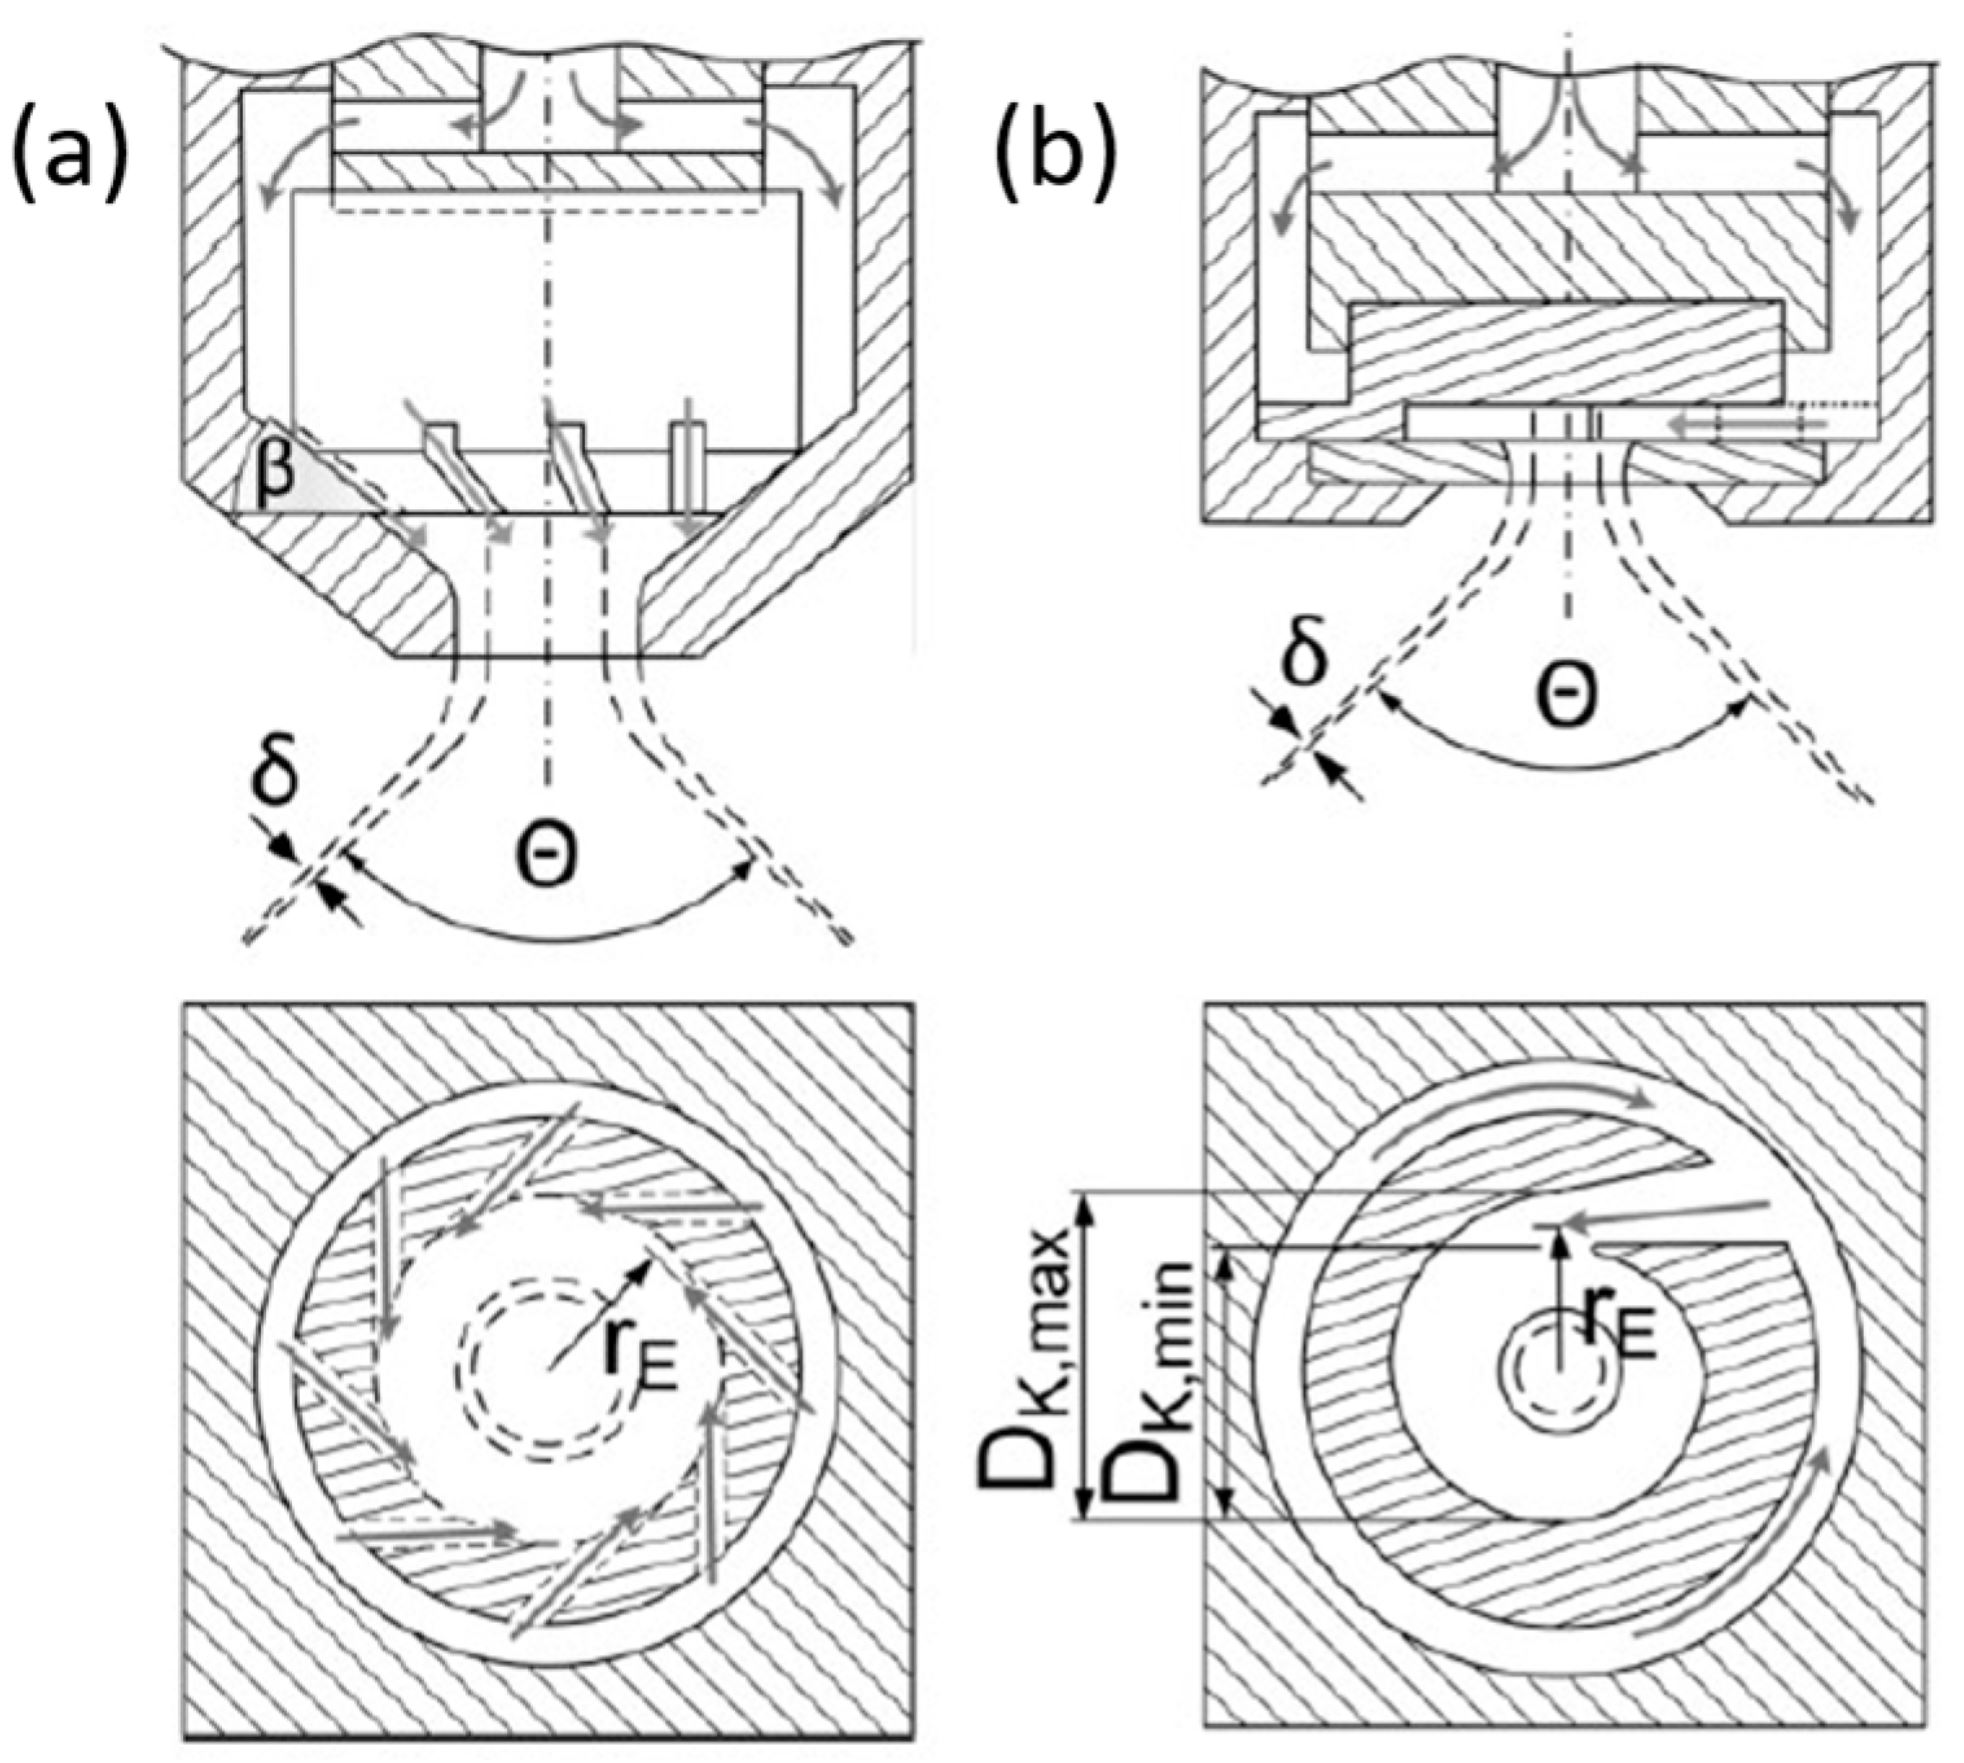 Influence of Nozzle Geometry and Scale-Up on Oil Droplet Breakup in the Atomization Step during Spray Drying of Emulsions